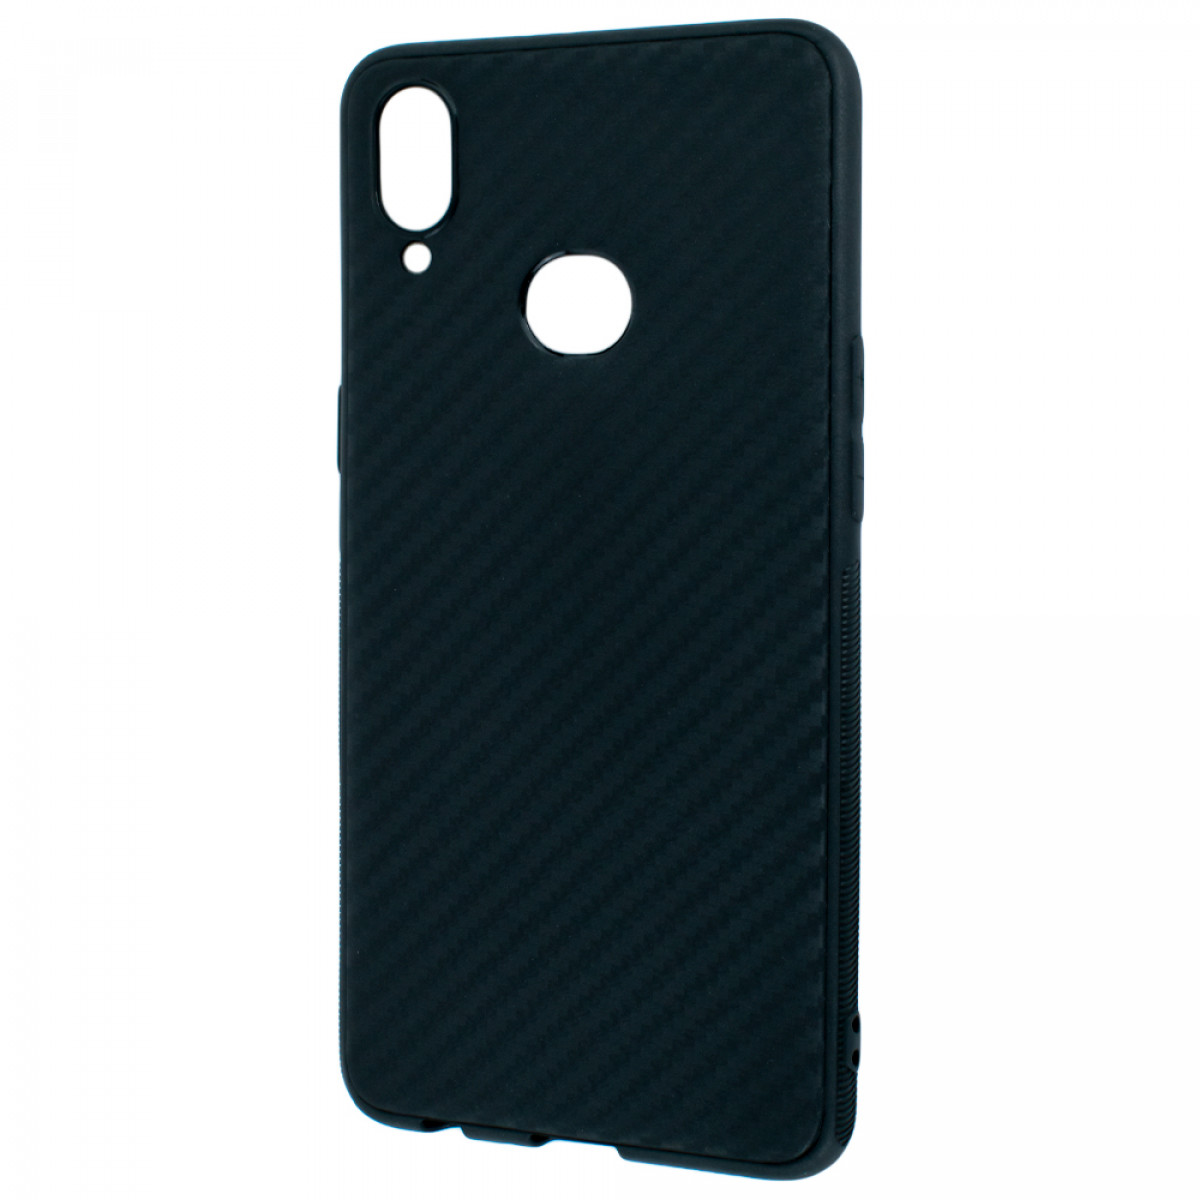 Carbon TPU Case for Samsung A10S